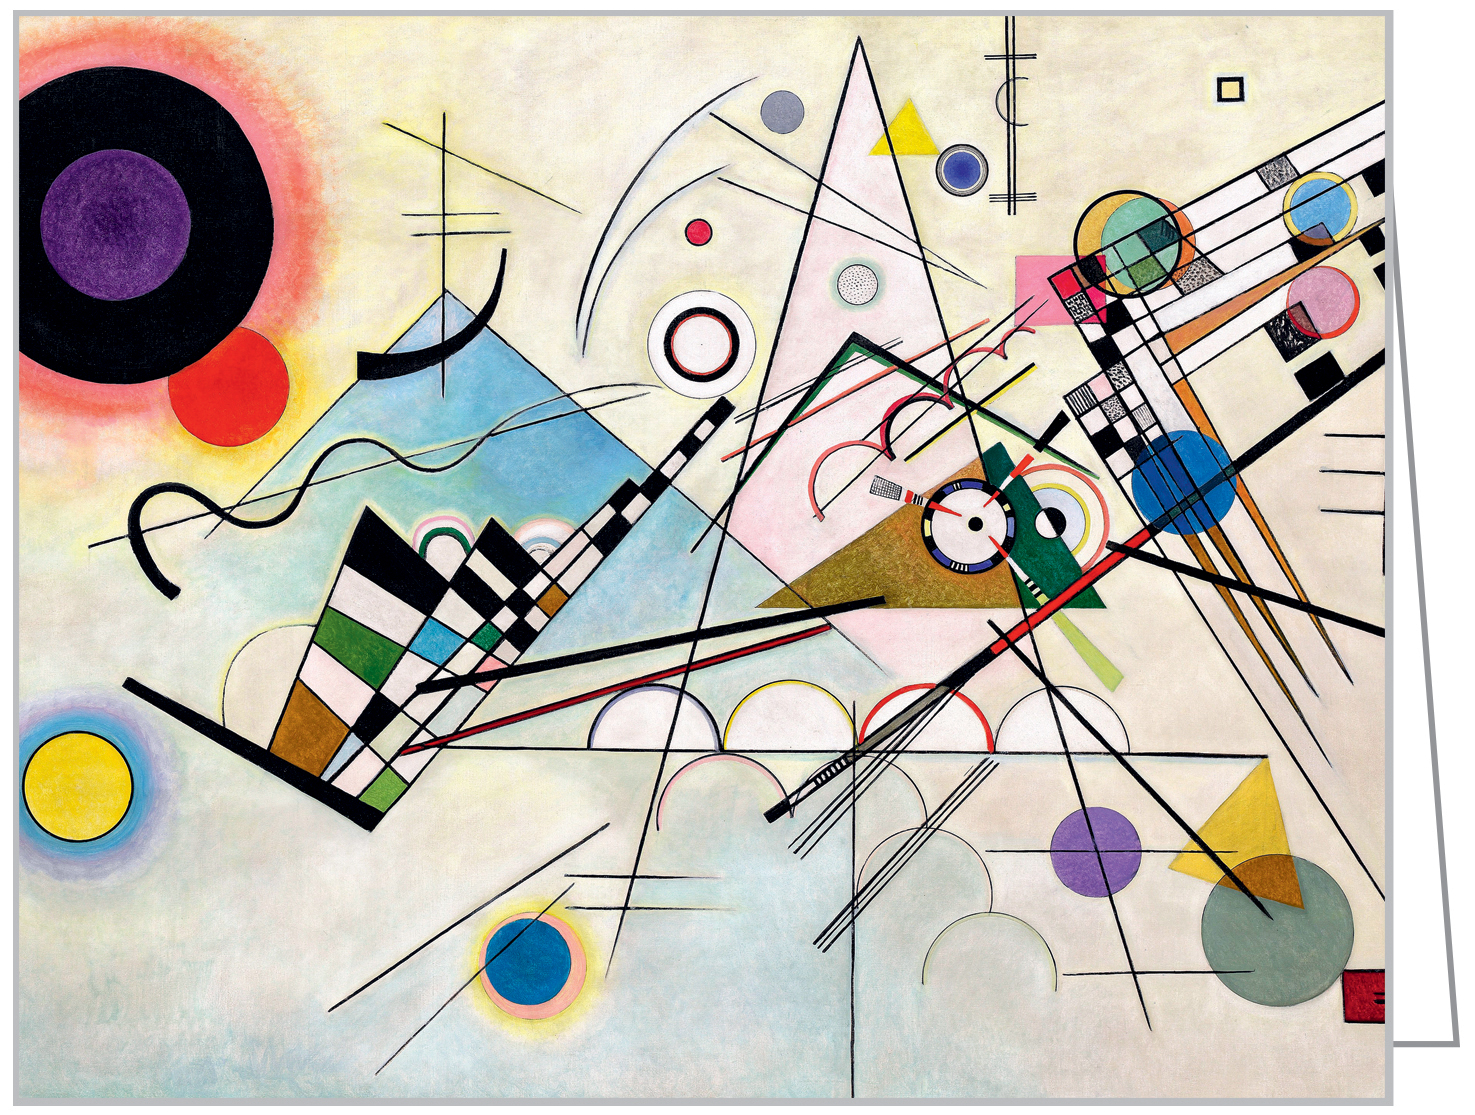 Abstract artist Vasily Kandinsky's 'Composition 8' works to notecard box, by teNeues stationery.